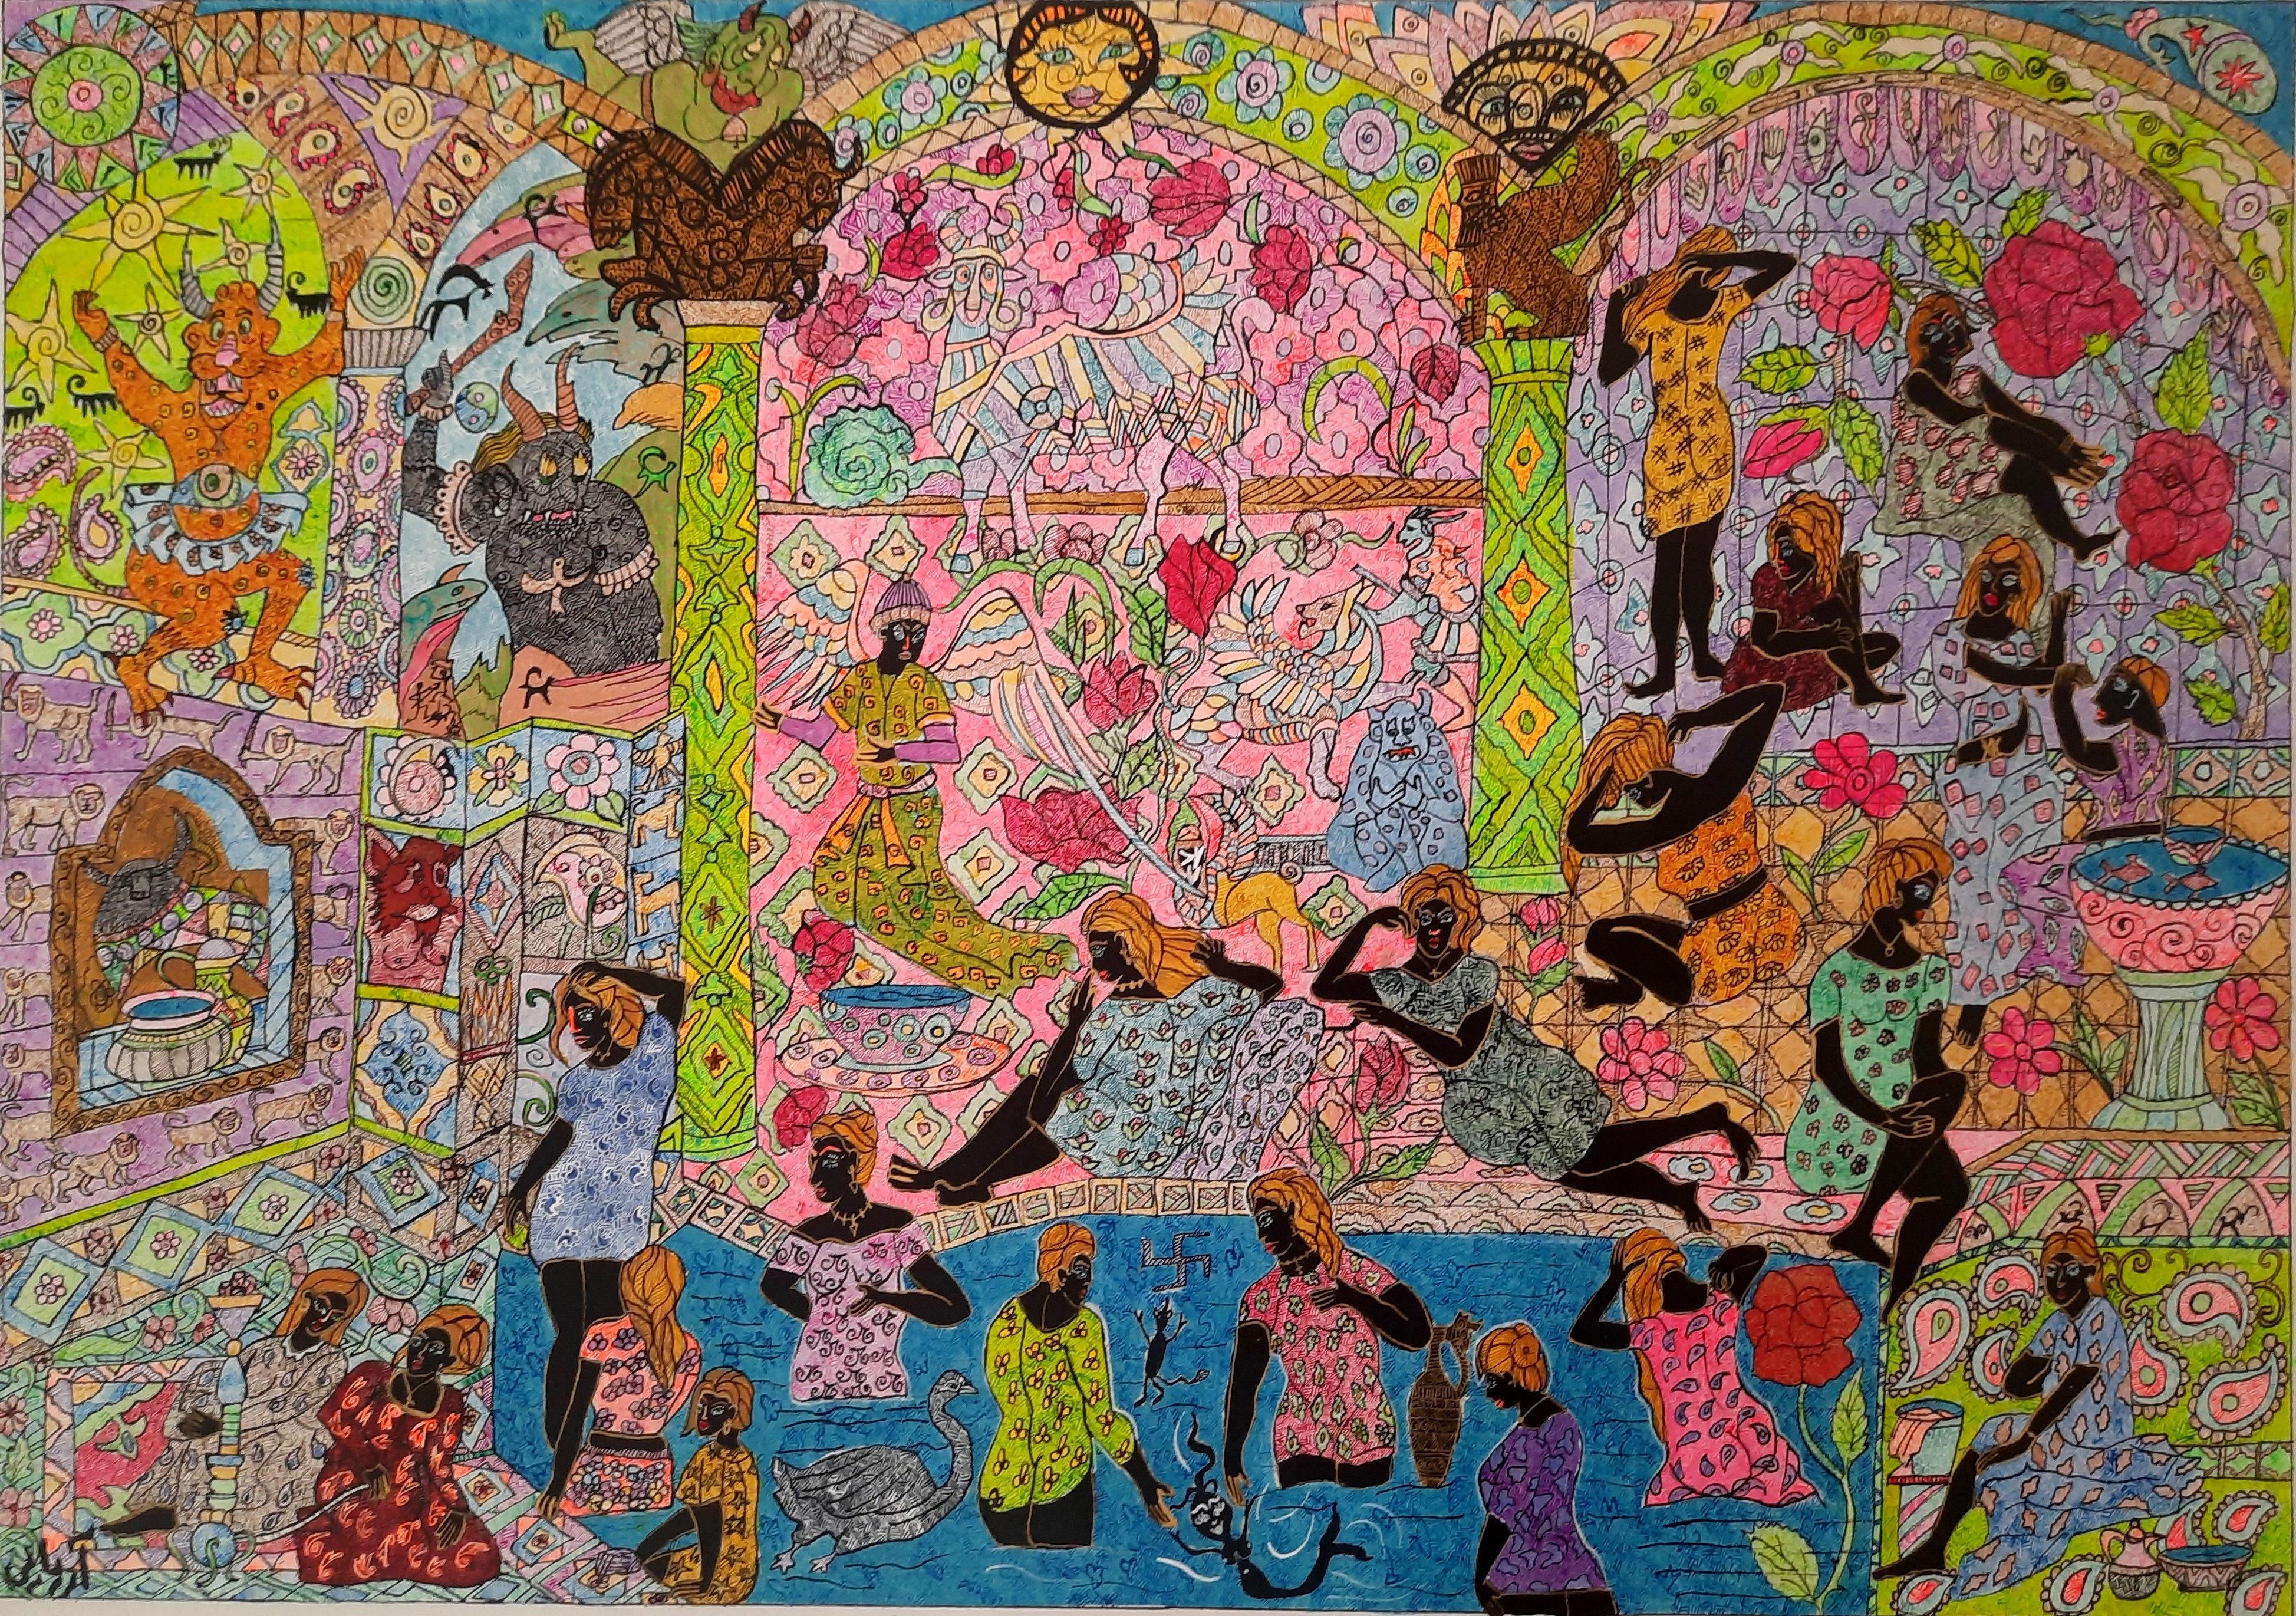 Acrylic painting on canvas
Hand-signed lower left
Unique work

THE THOUSAND AND ONE NIGHTS OF MOHAMMAD ARIYAEI

" Gentleness and oriental wisdom follow the supercharged bubbling to which we were accustomed from the previous deliberately art brut